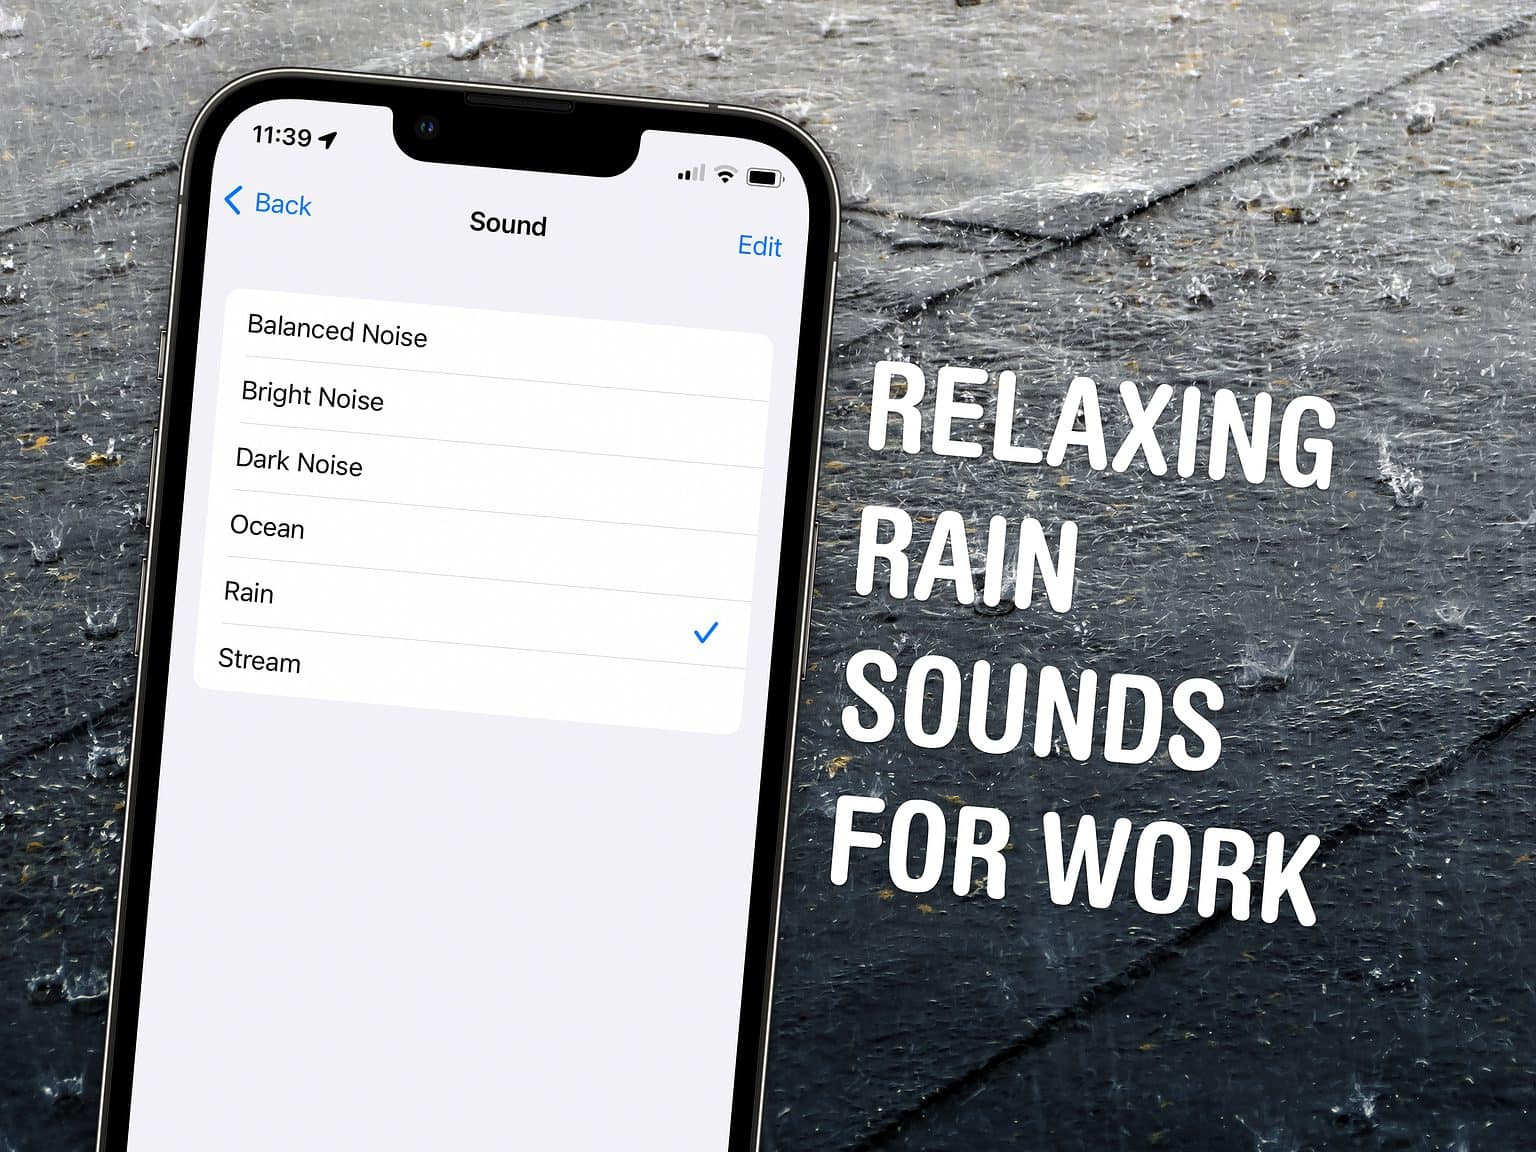 Relaxing Rain Sounds For Work